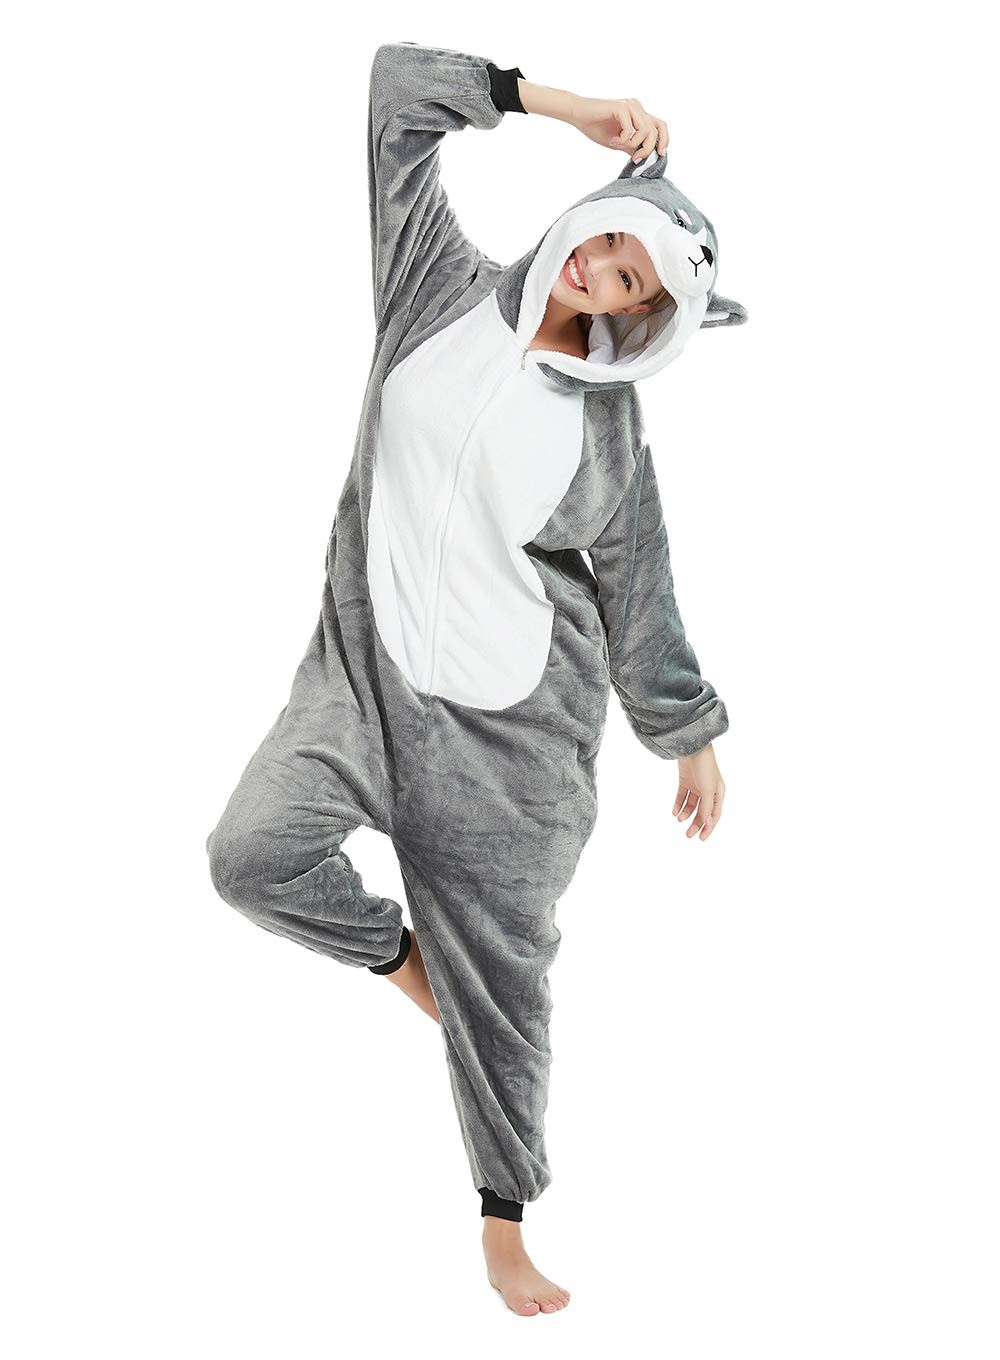 Husky Onesie Costume Halloween Outfit for Adult & Teens